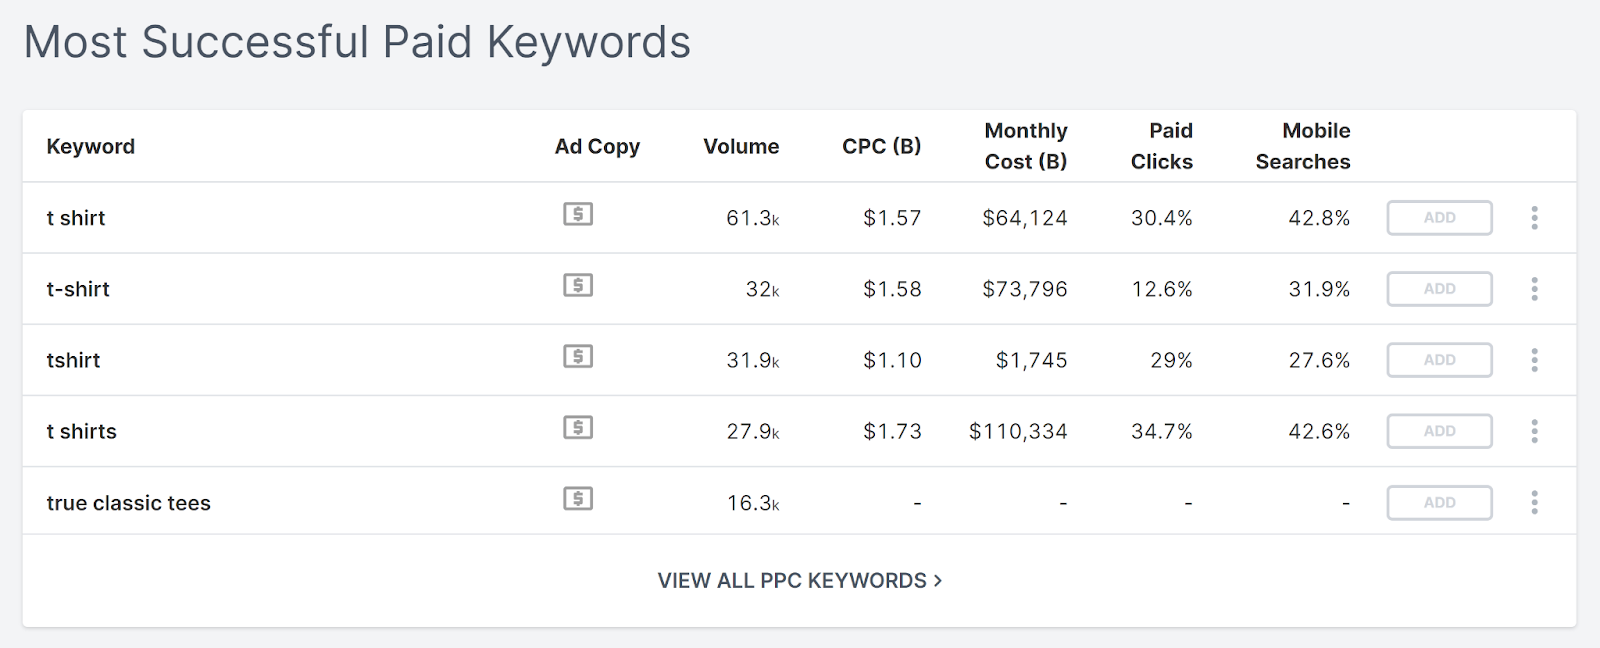 Most successful paid keywords table.